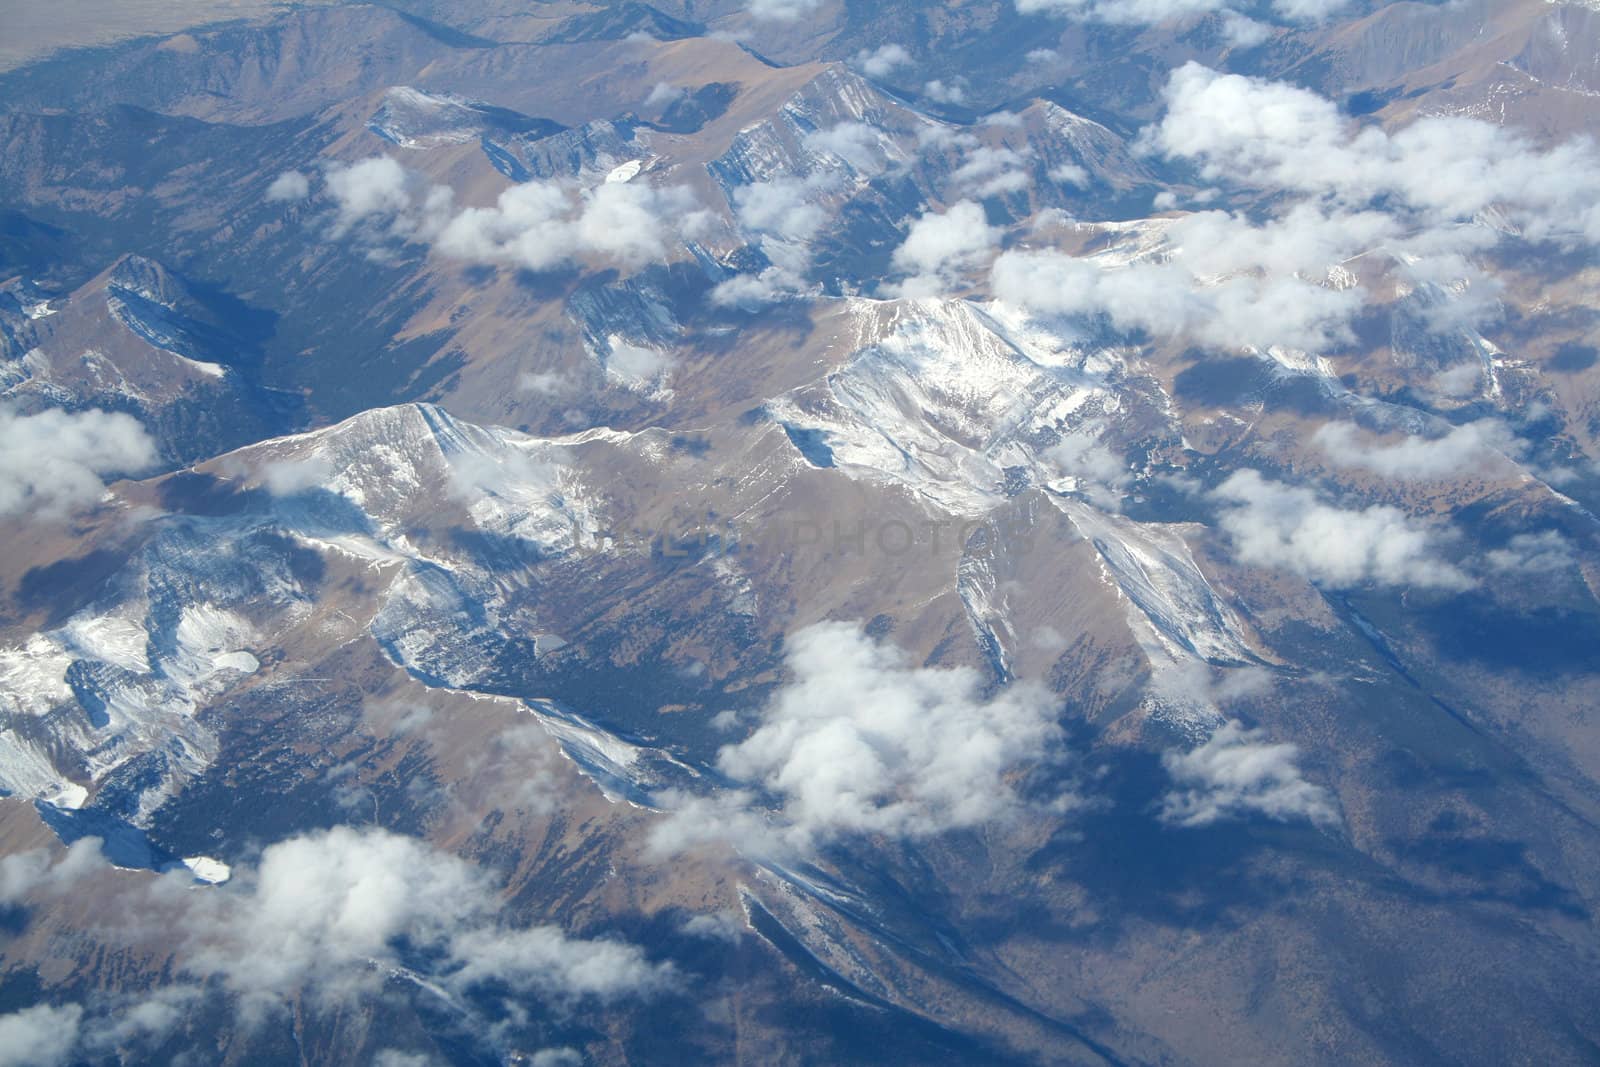 Snow dusted rocky mountains